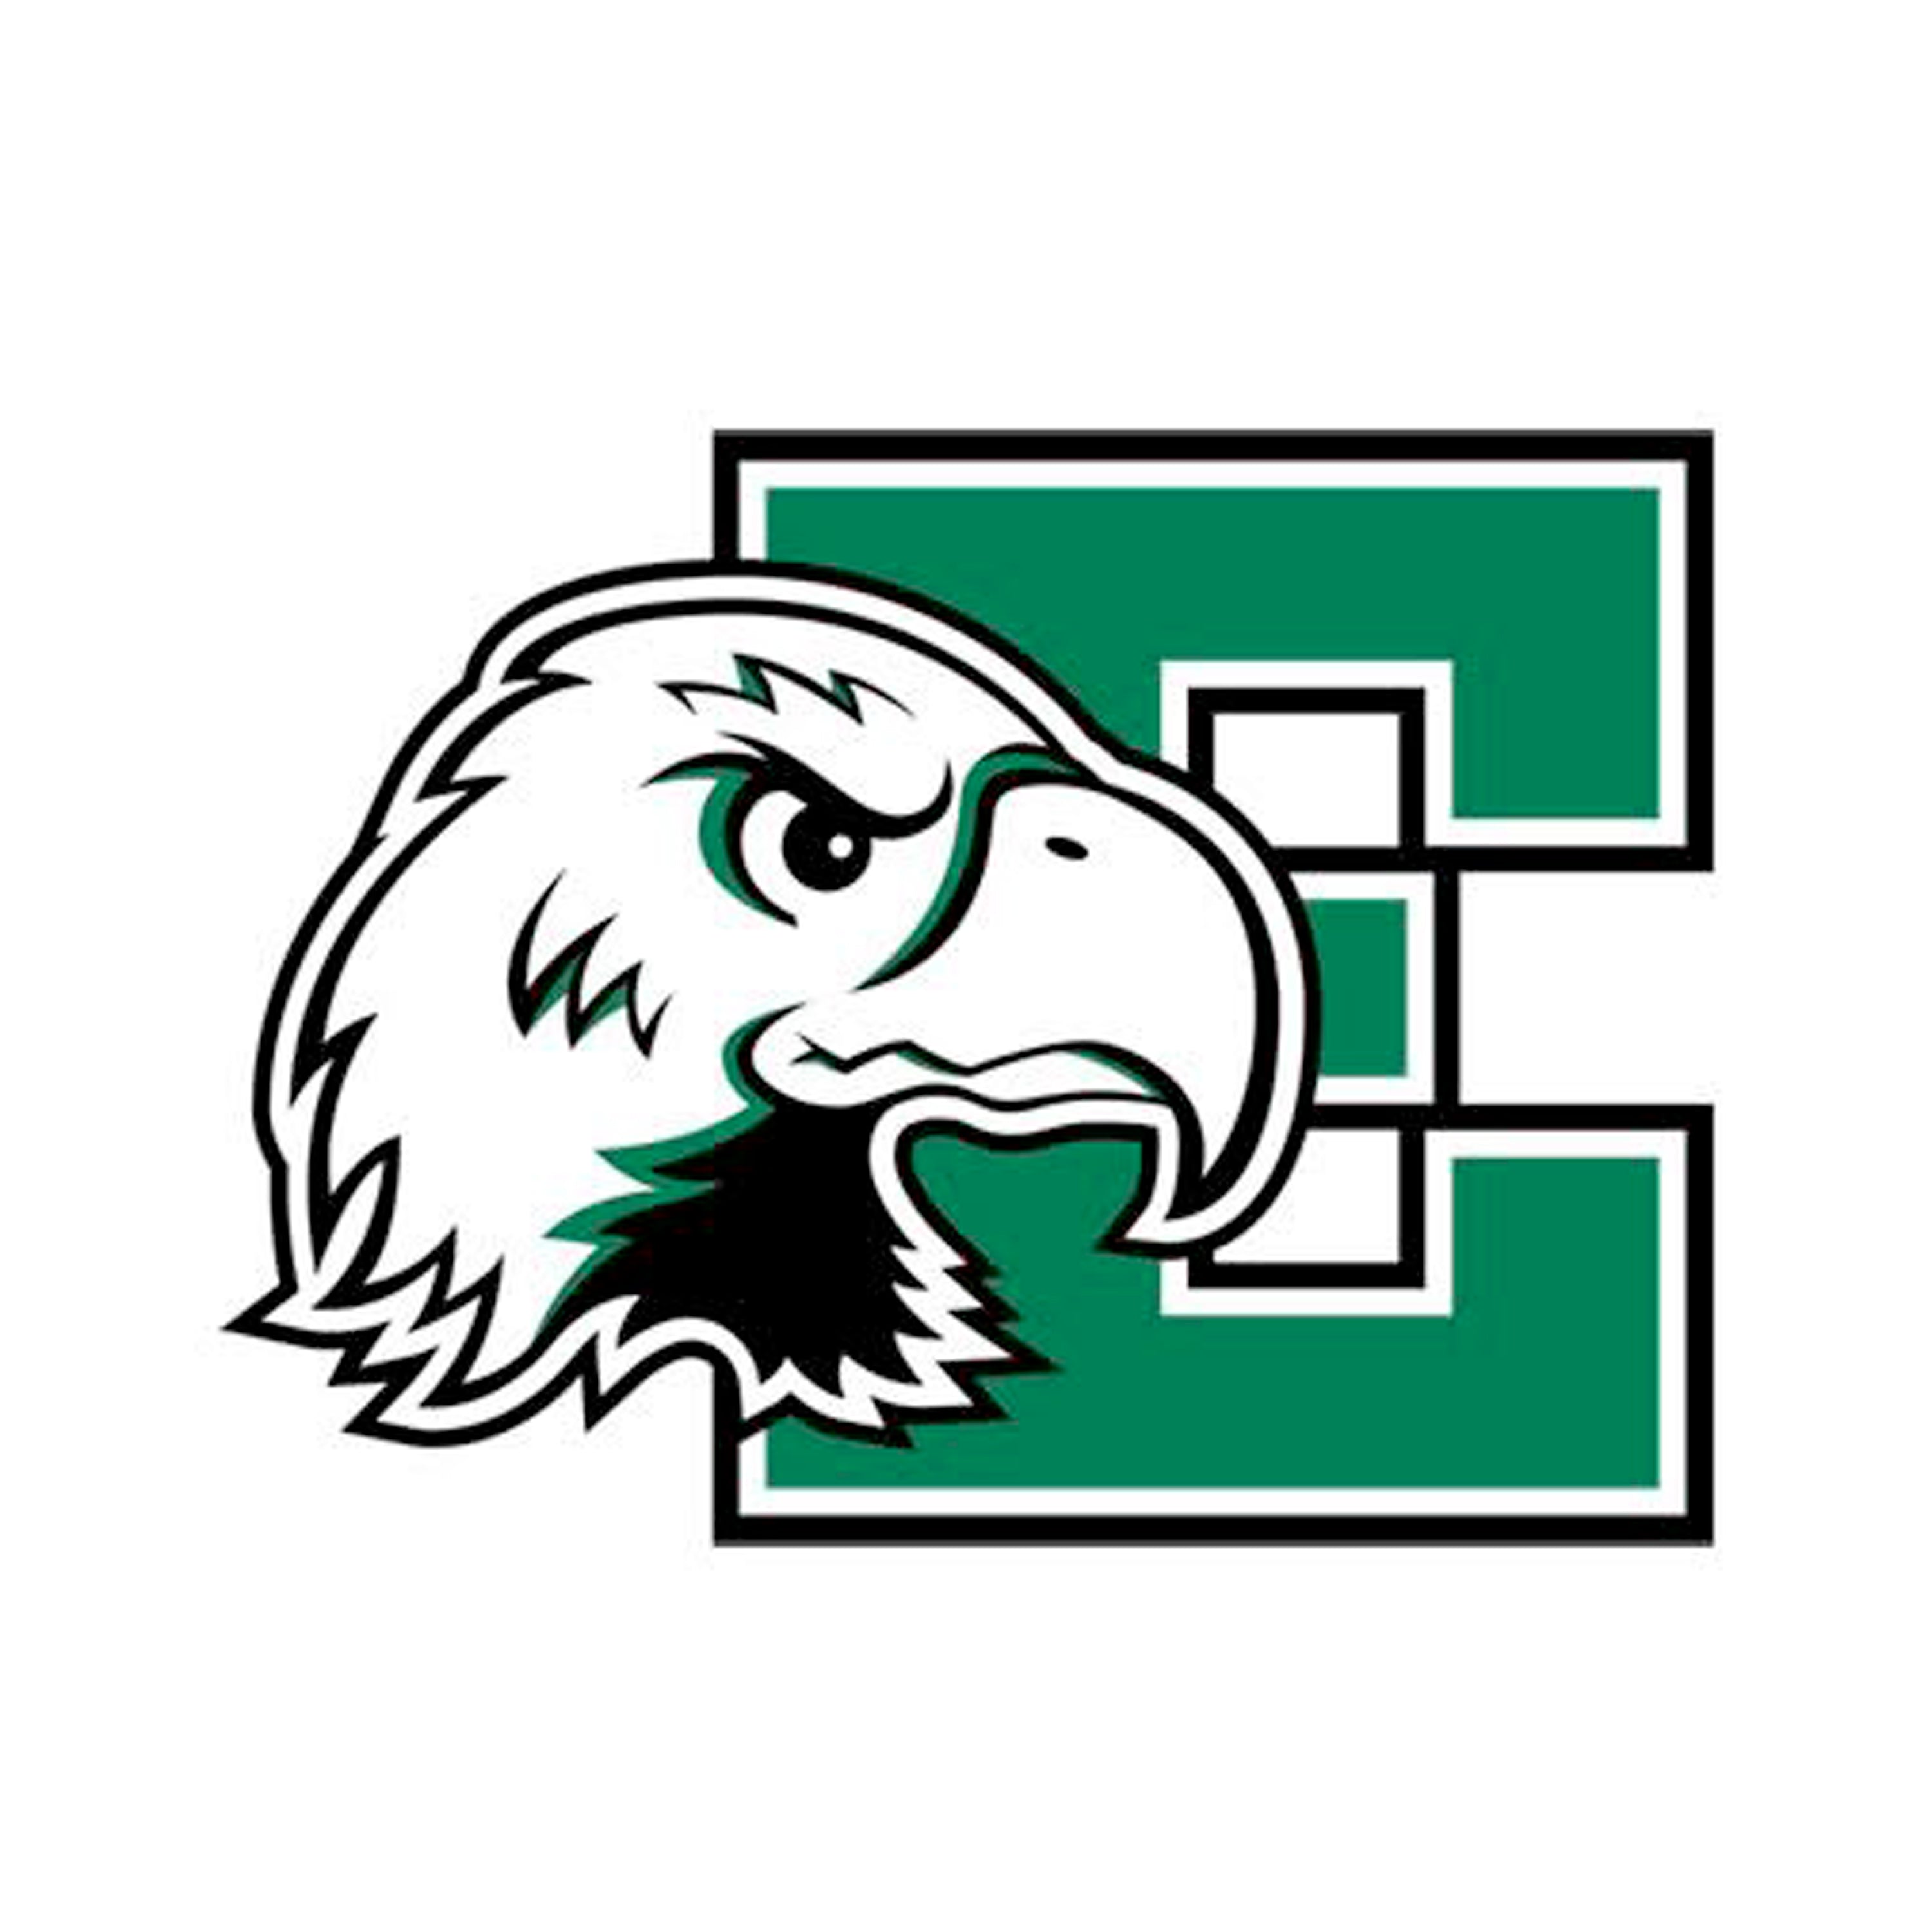 Eastern Michigan University Southern Recognition, Inc.